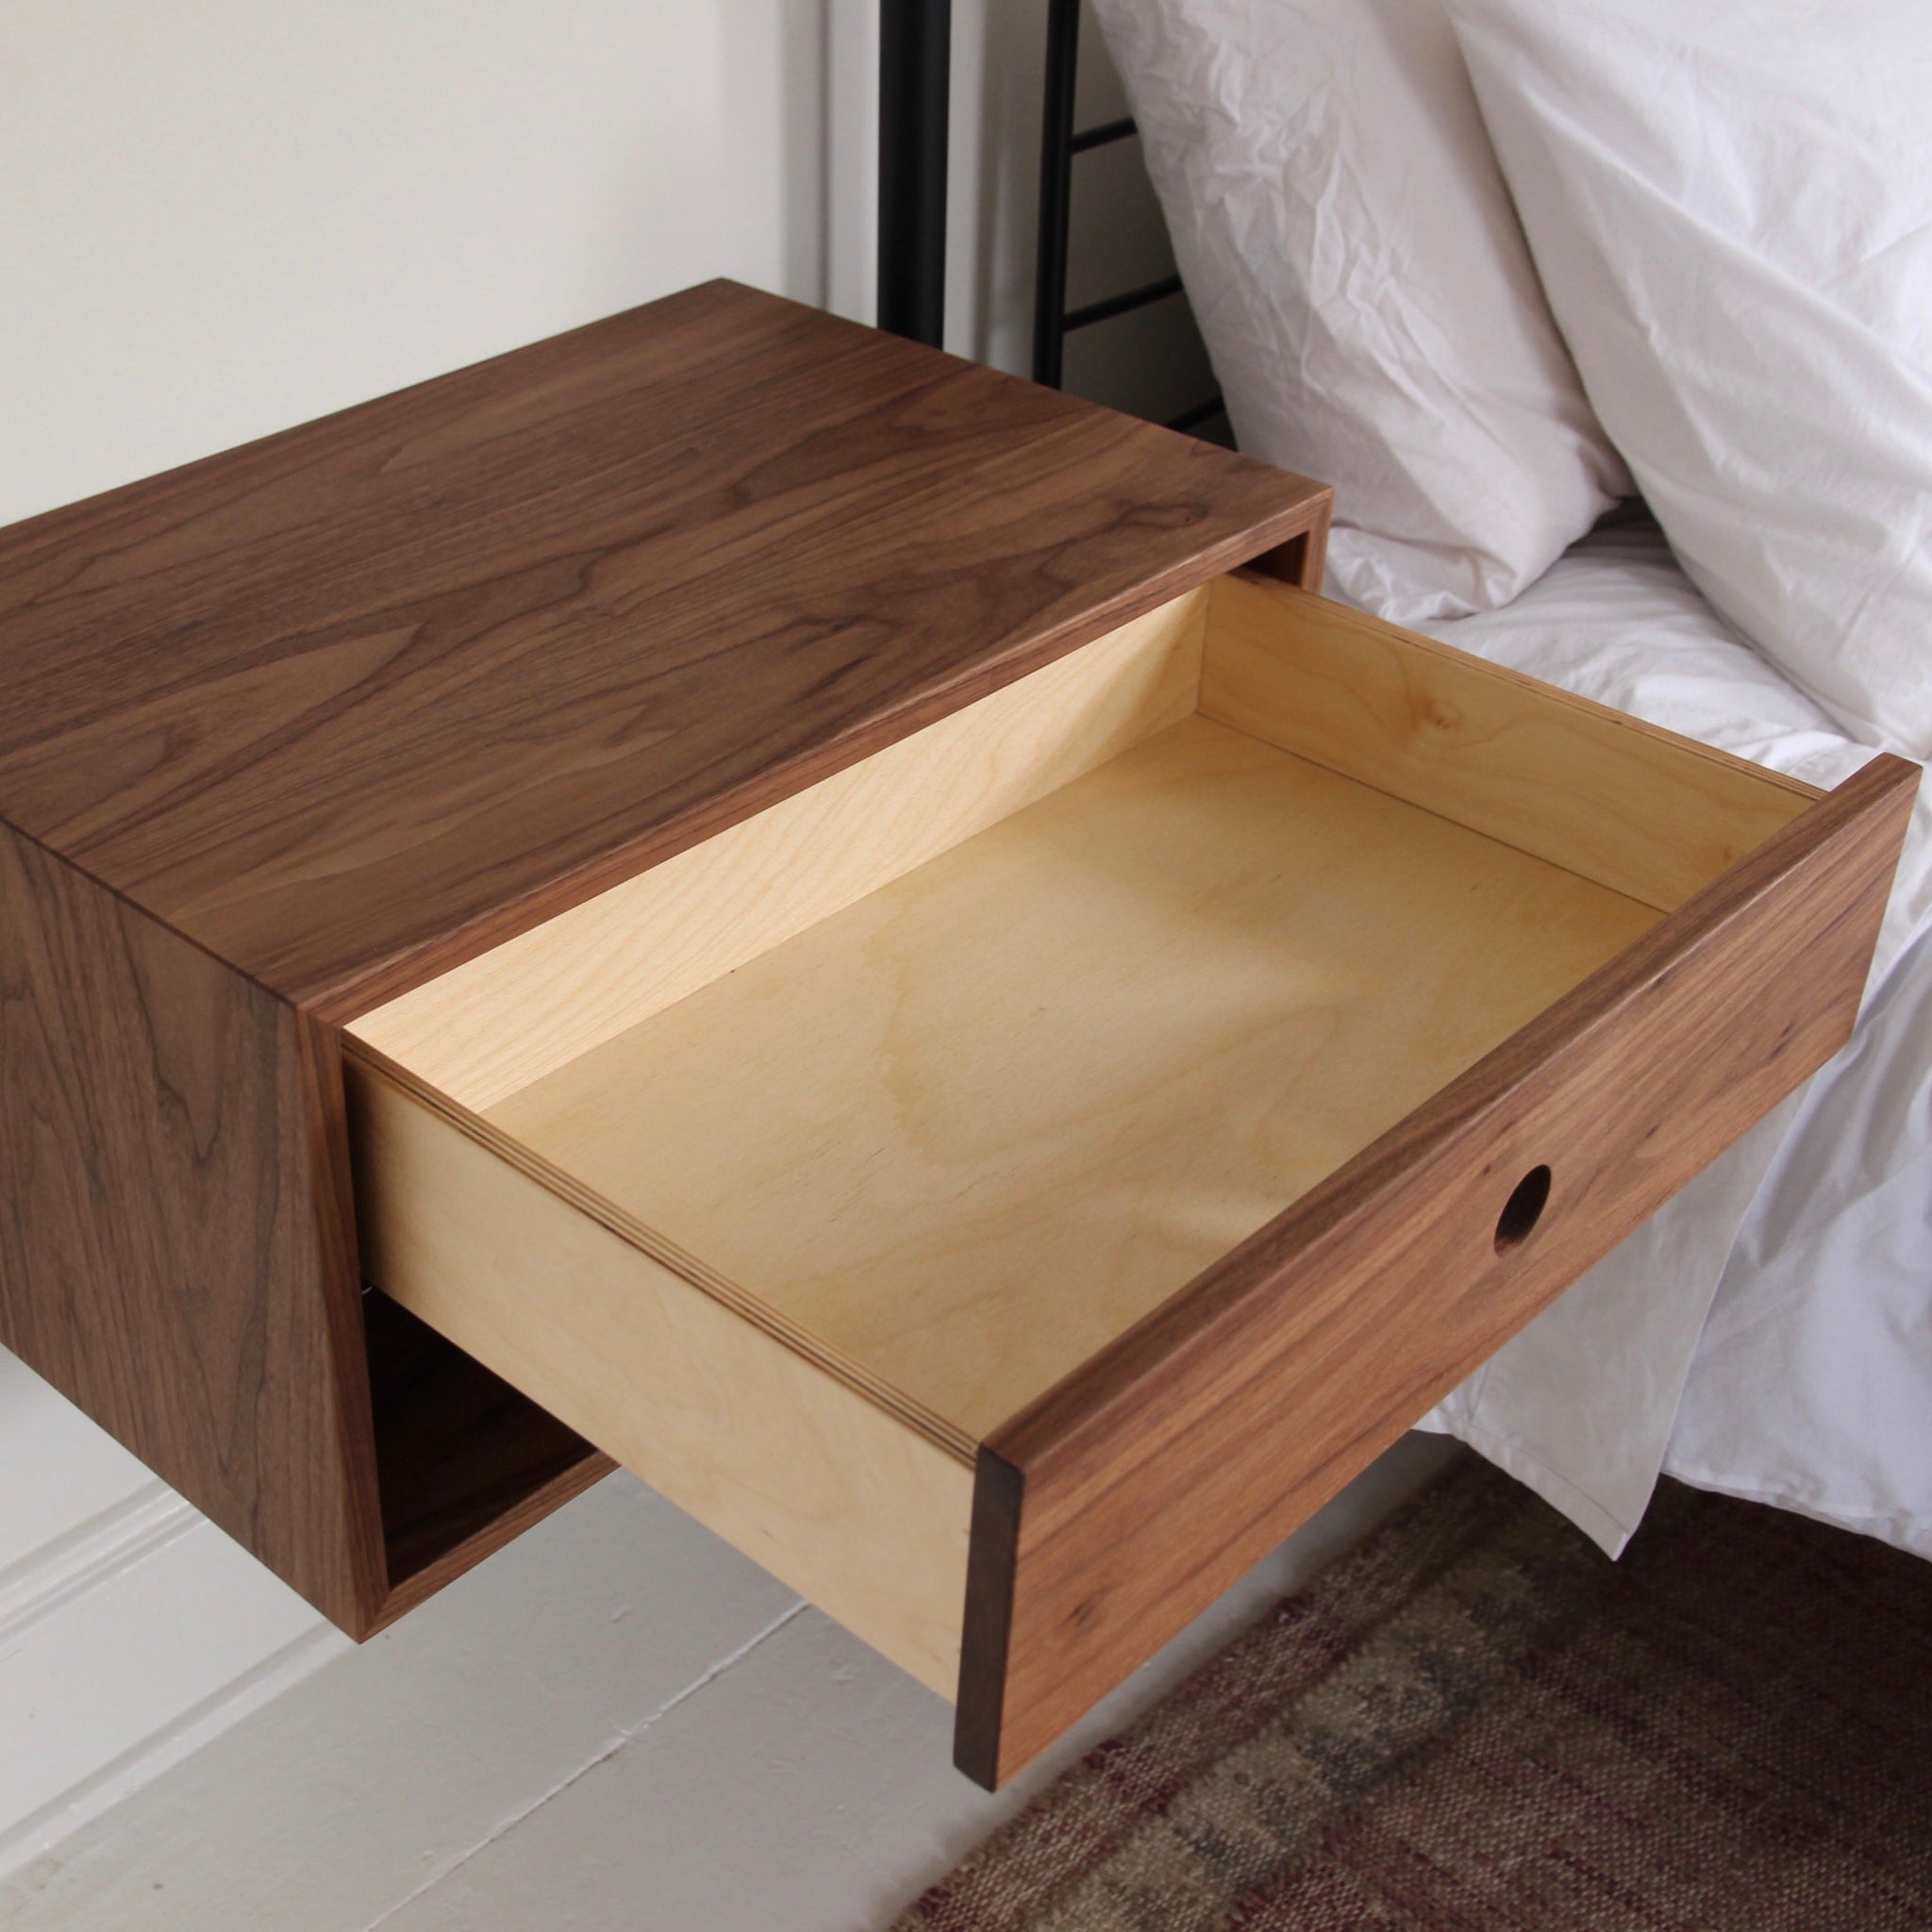 Double Tall Floating Nightstand in Walnut - Krøvel Furniture Co. Handmade in Maine